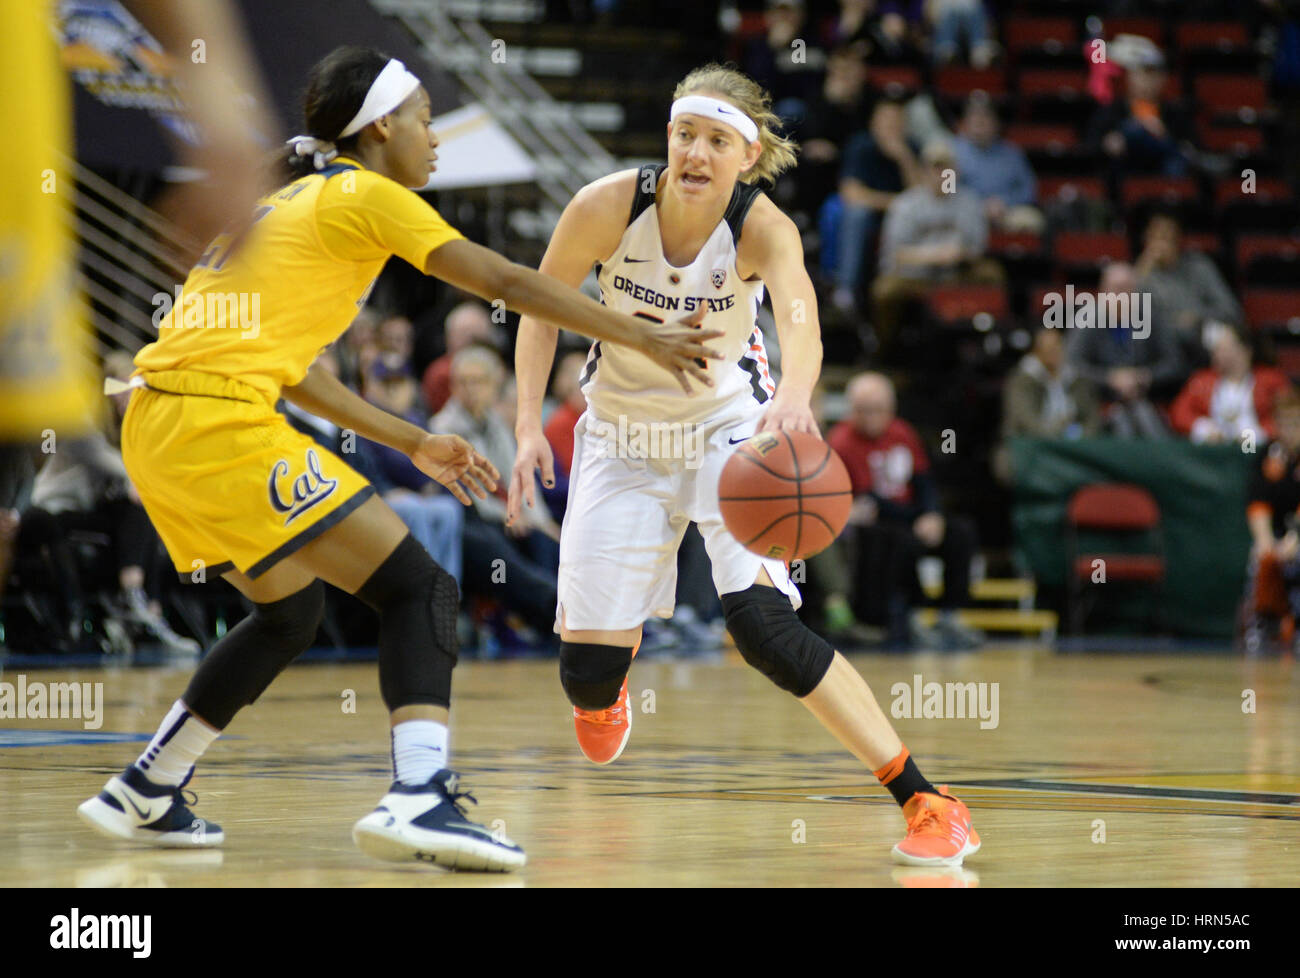 Seattle, WA, USA. 3rd Mar, 2017. OSU point guard Sydney Wiese (24) brings the ball down court against Cal's Mi'Cole Cayton (21) during a PAC12 women's tournament game between the Oregon State Beavers and the Cal Bears. The game was played at Key Arena in Seattle, WA. Jeff Halstead/CSM/Alamy Live News Stock Photo